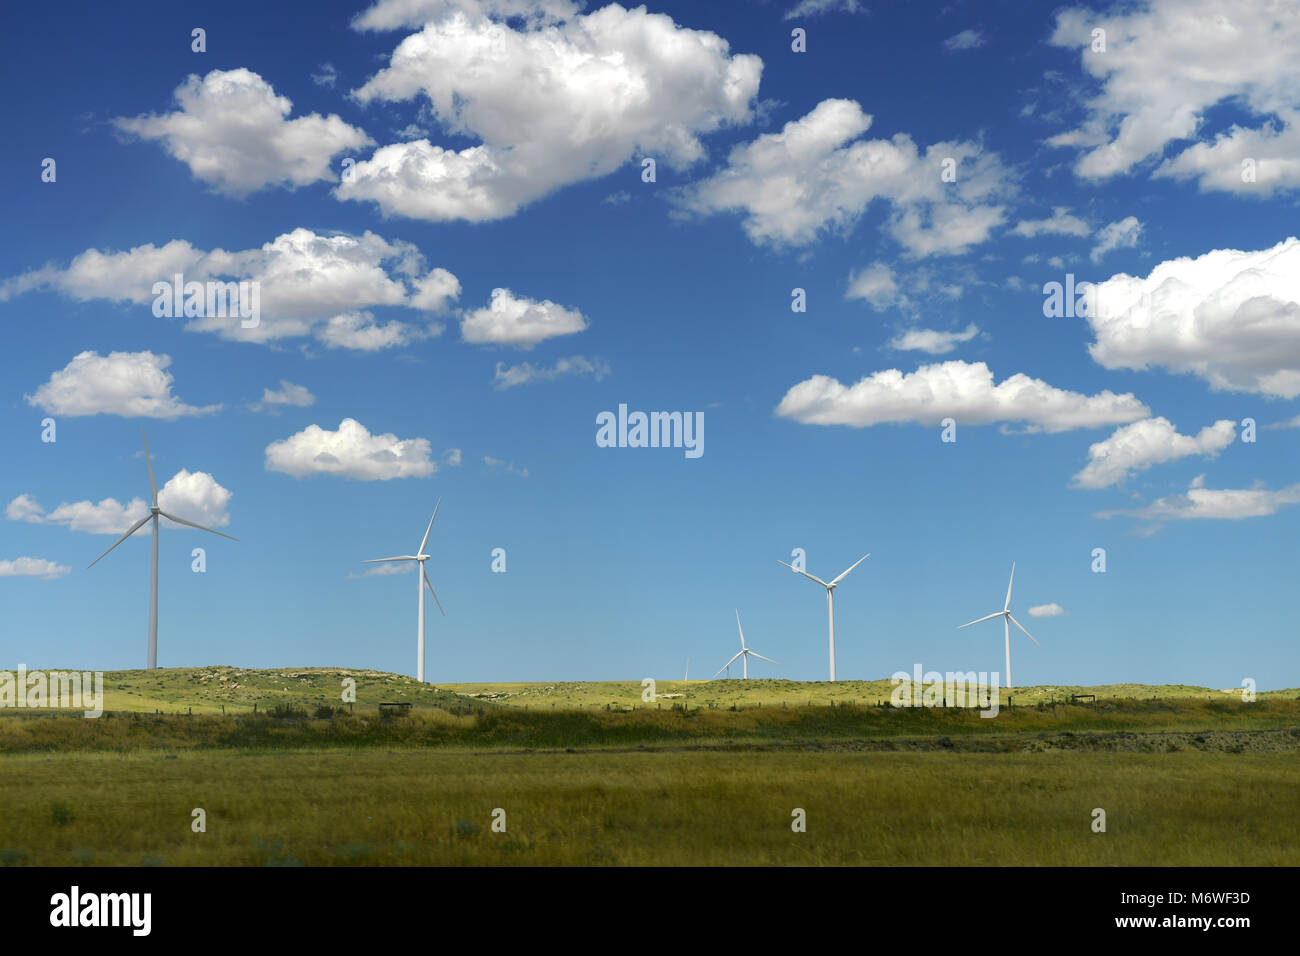 Wind turbines in open field during bright day Stock Photo